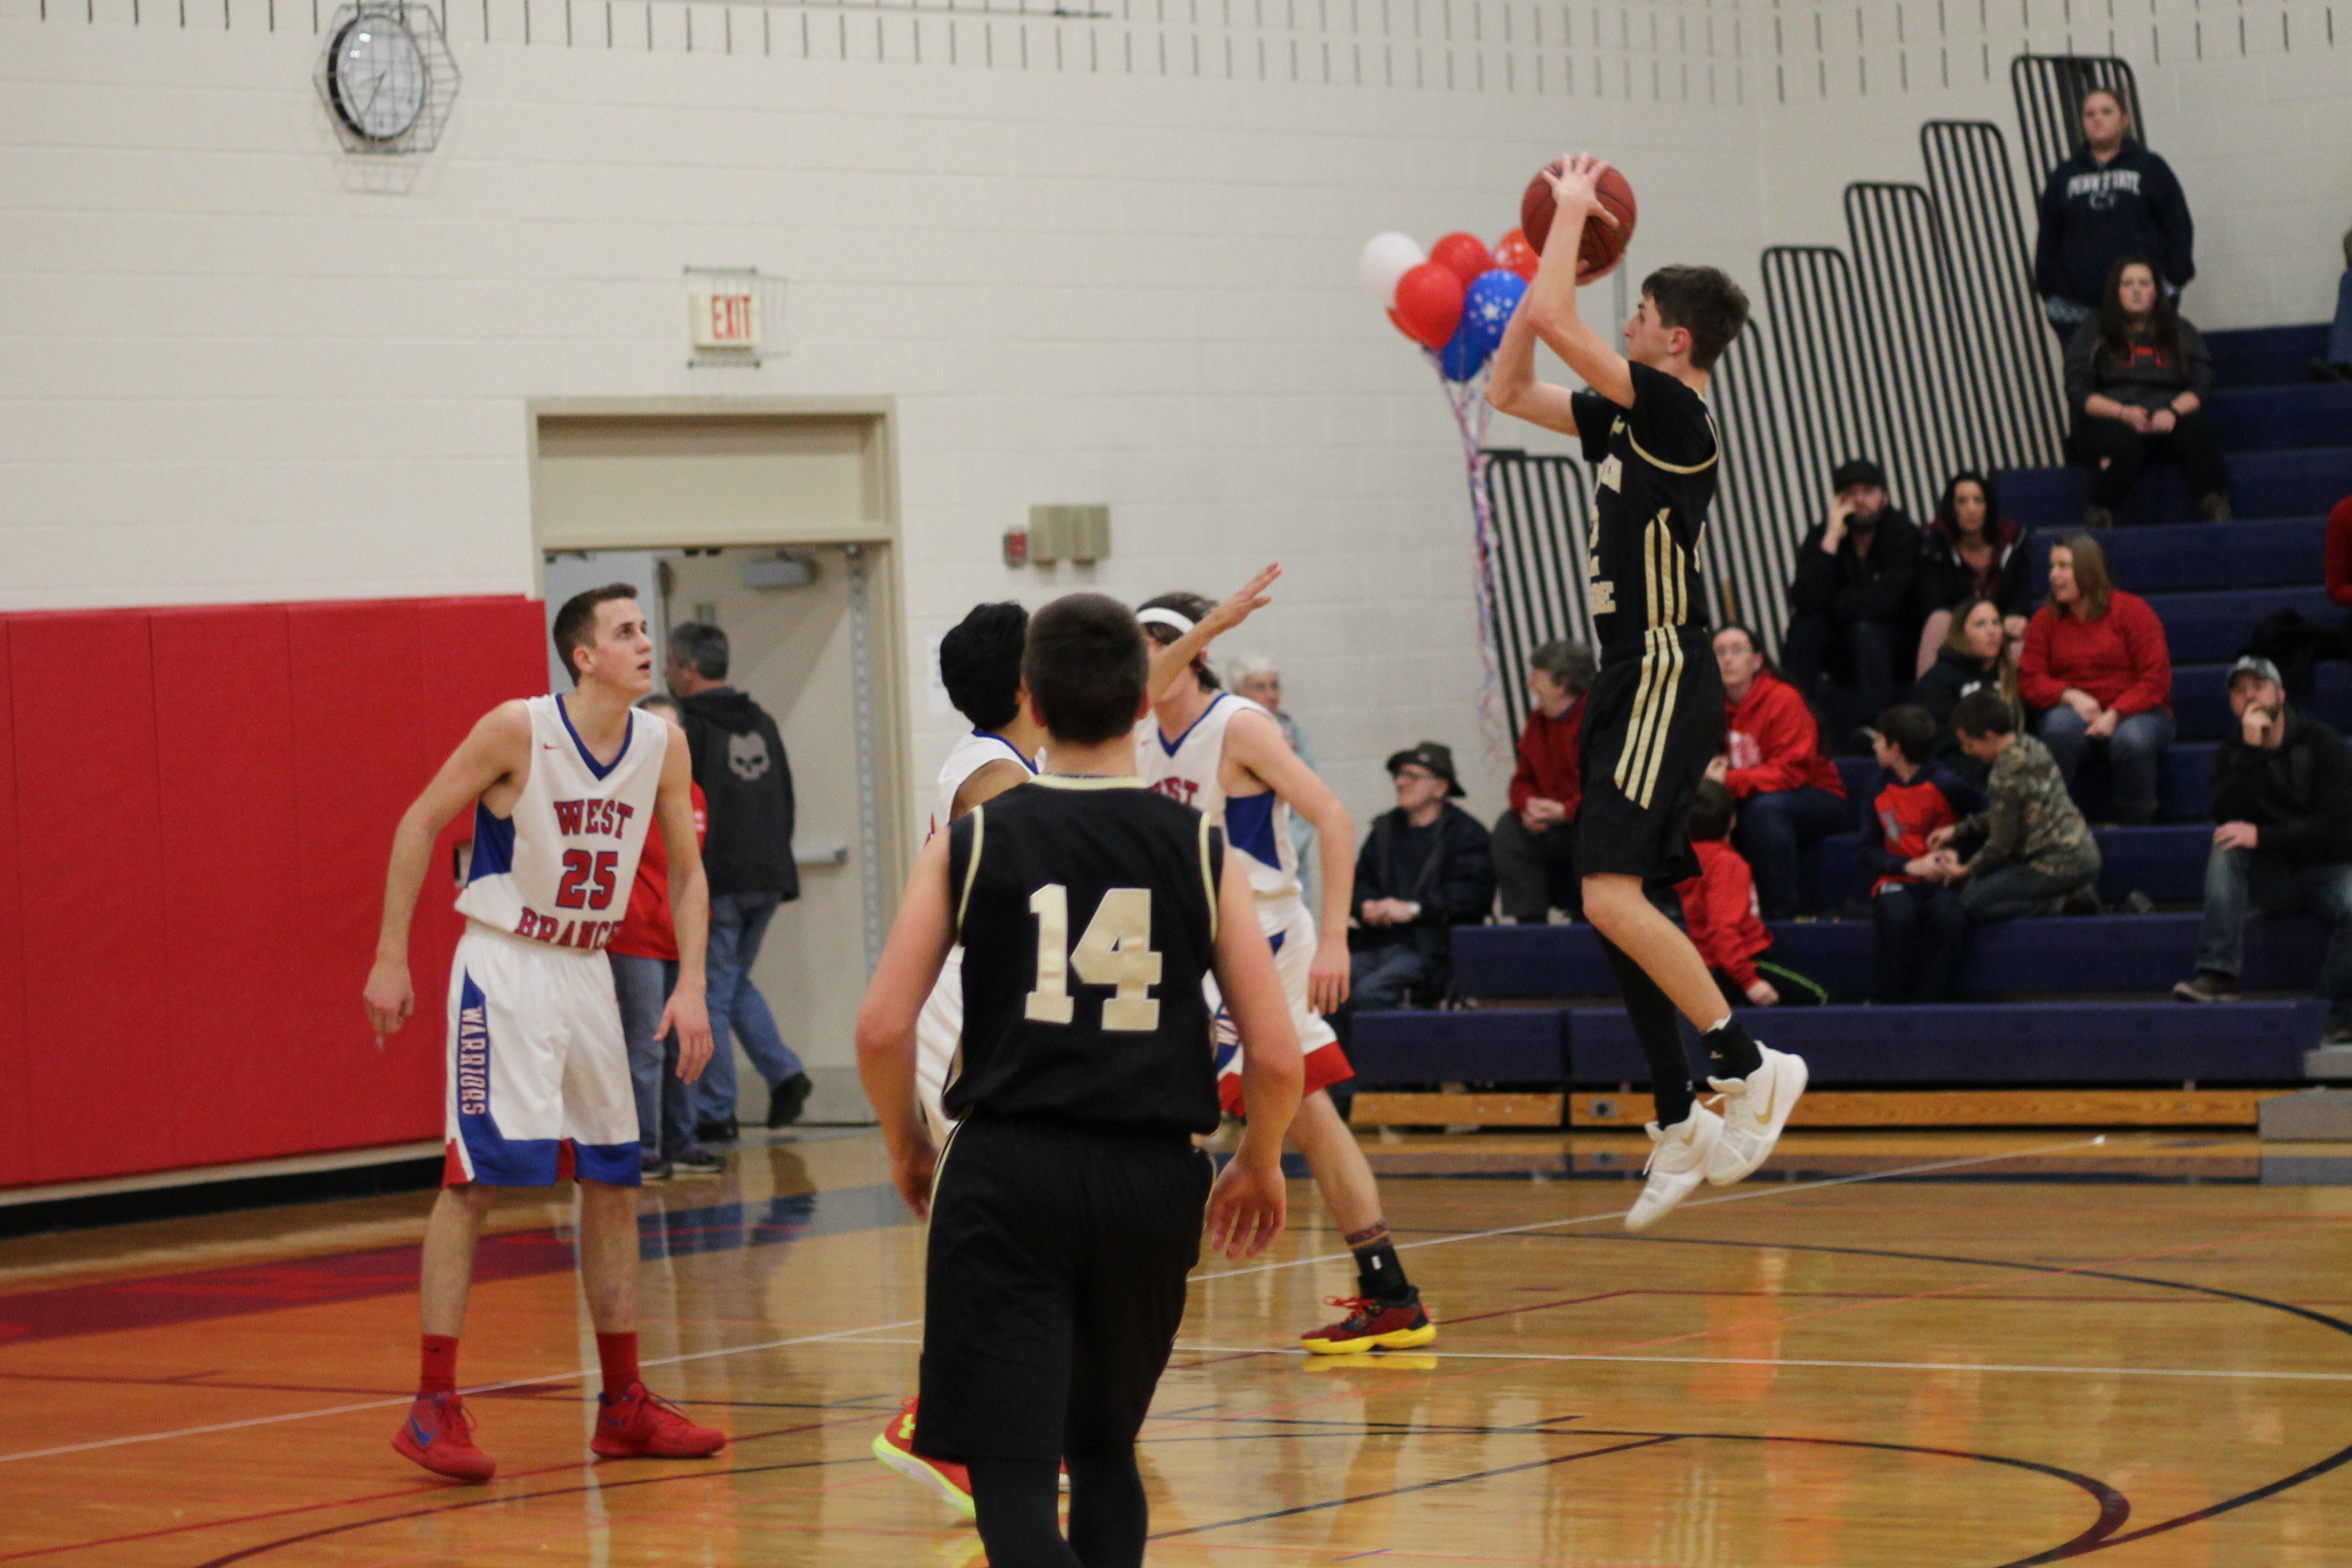 Josh Terry (in air) tries a pull back jump shot in the final quarter while Christian Bakaysa (14) and West Branch's Larry Cowder (25) look on.